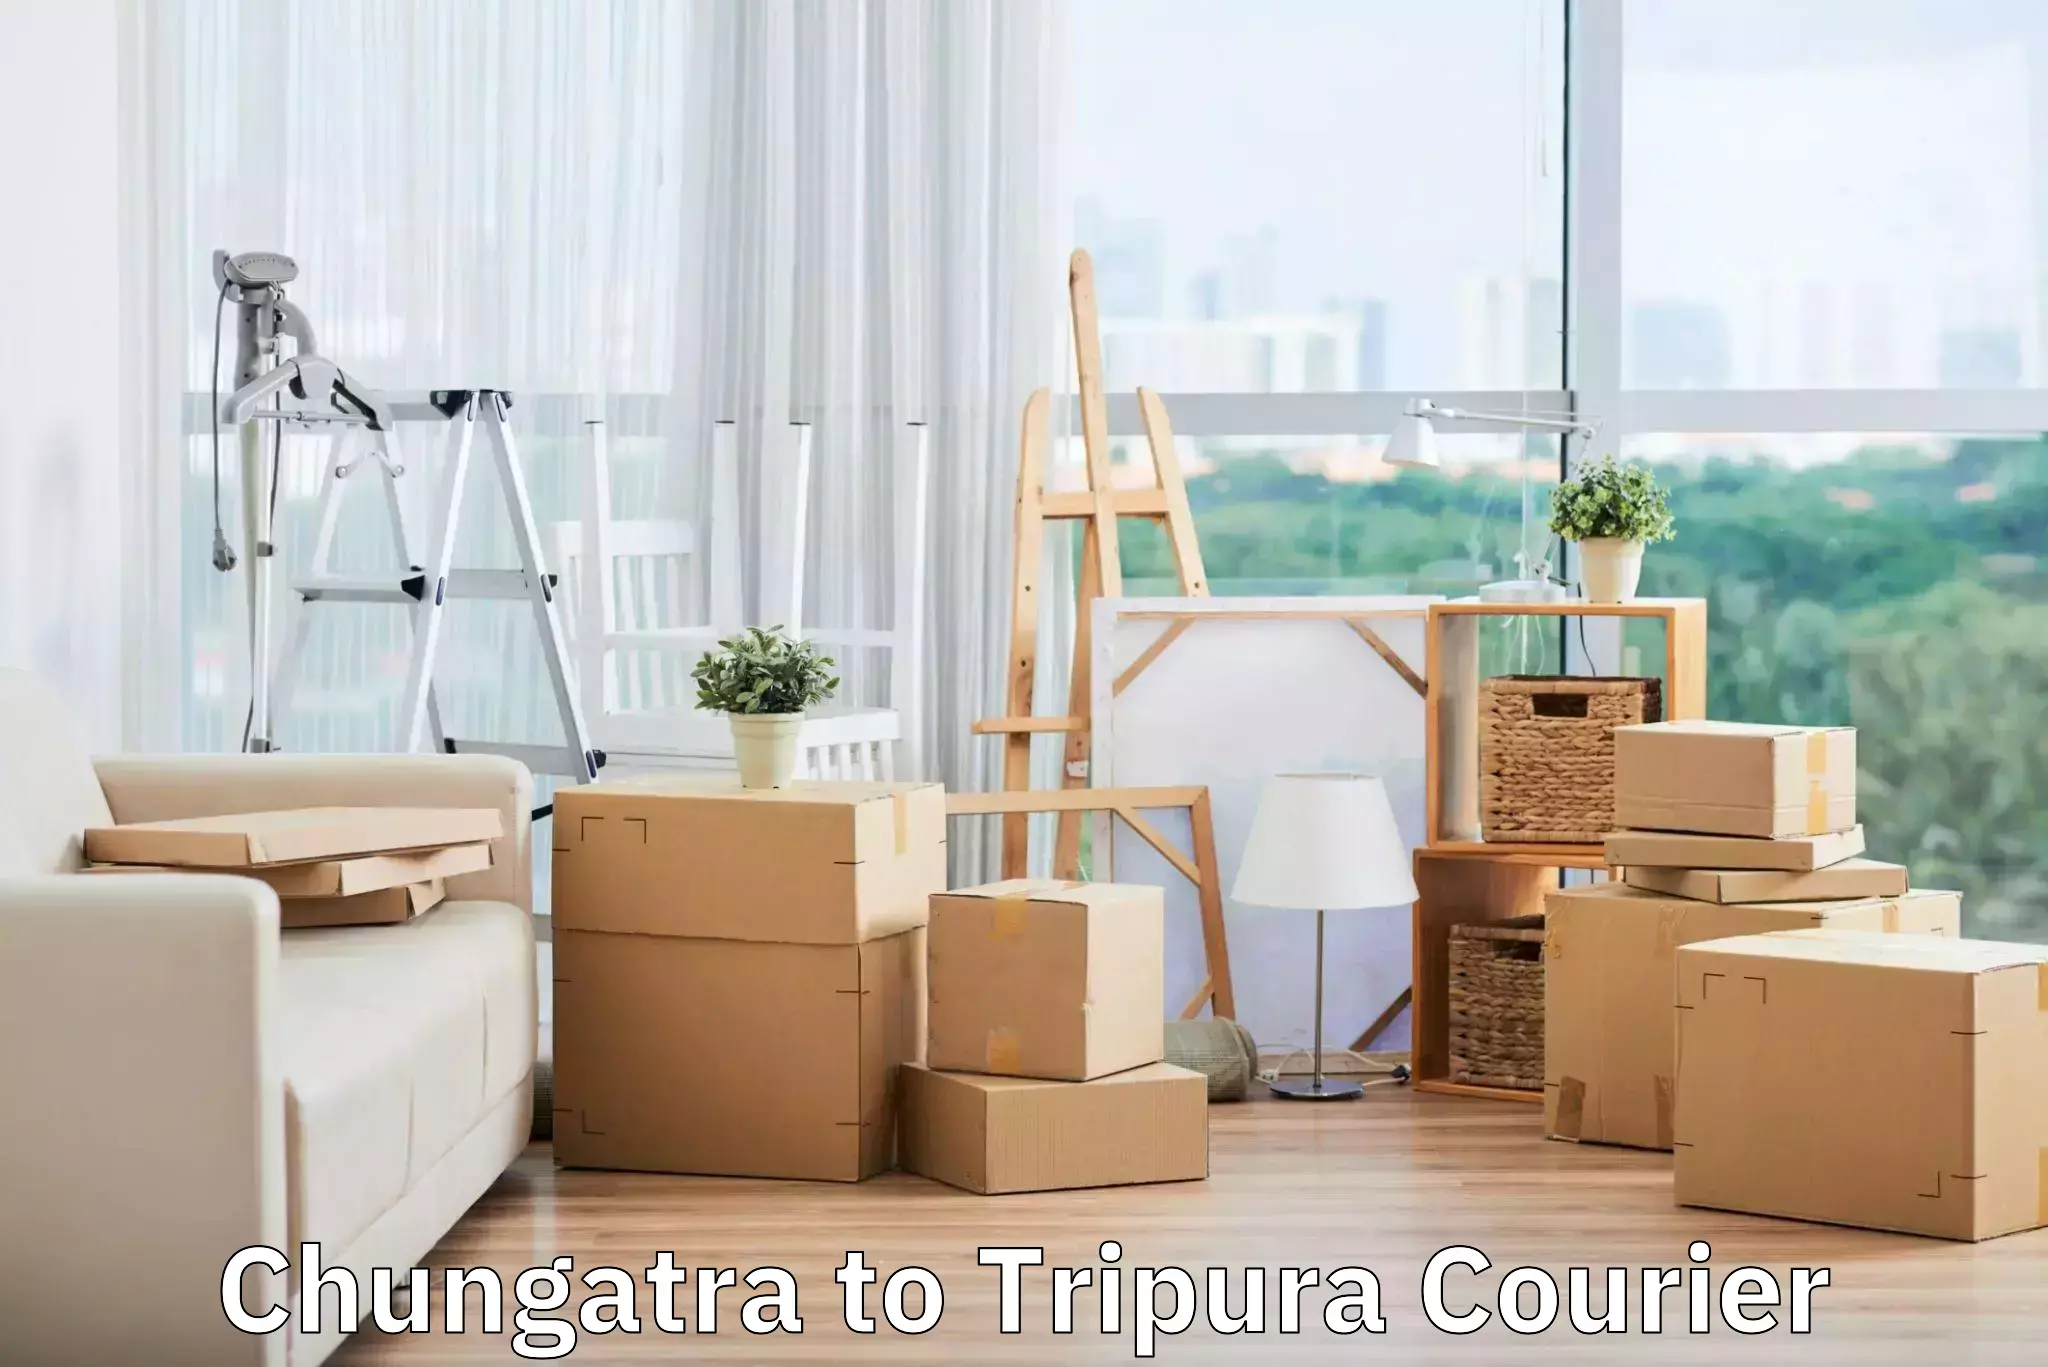 Efficient baggage courier system Chungatra to Udaipur Tripura